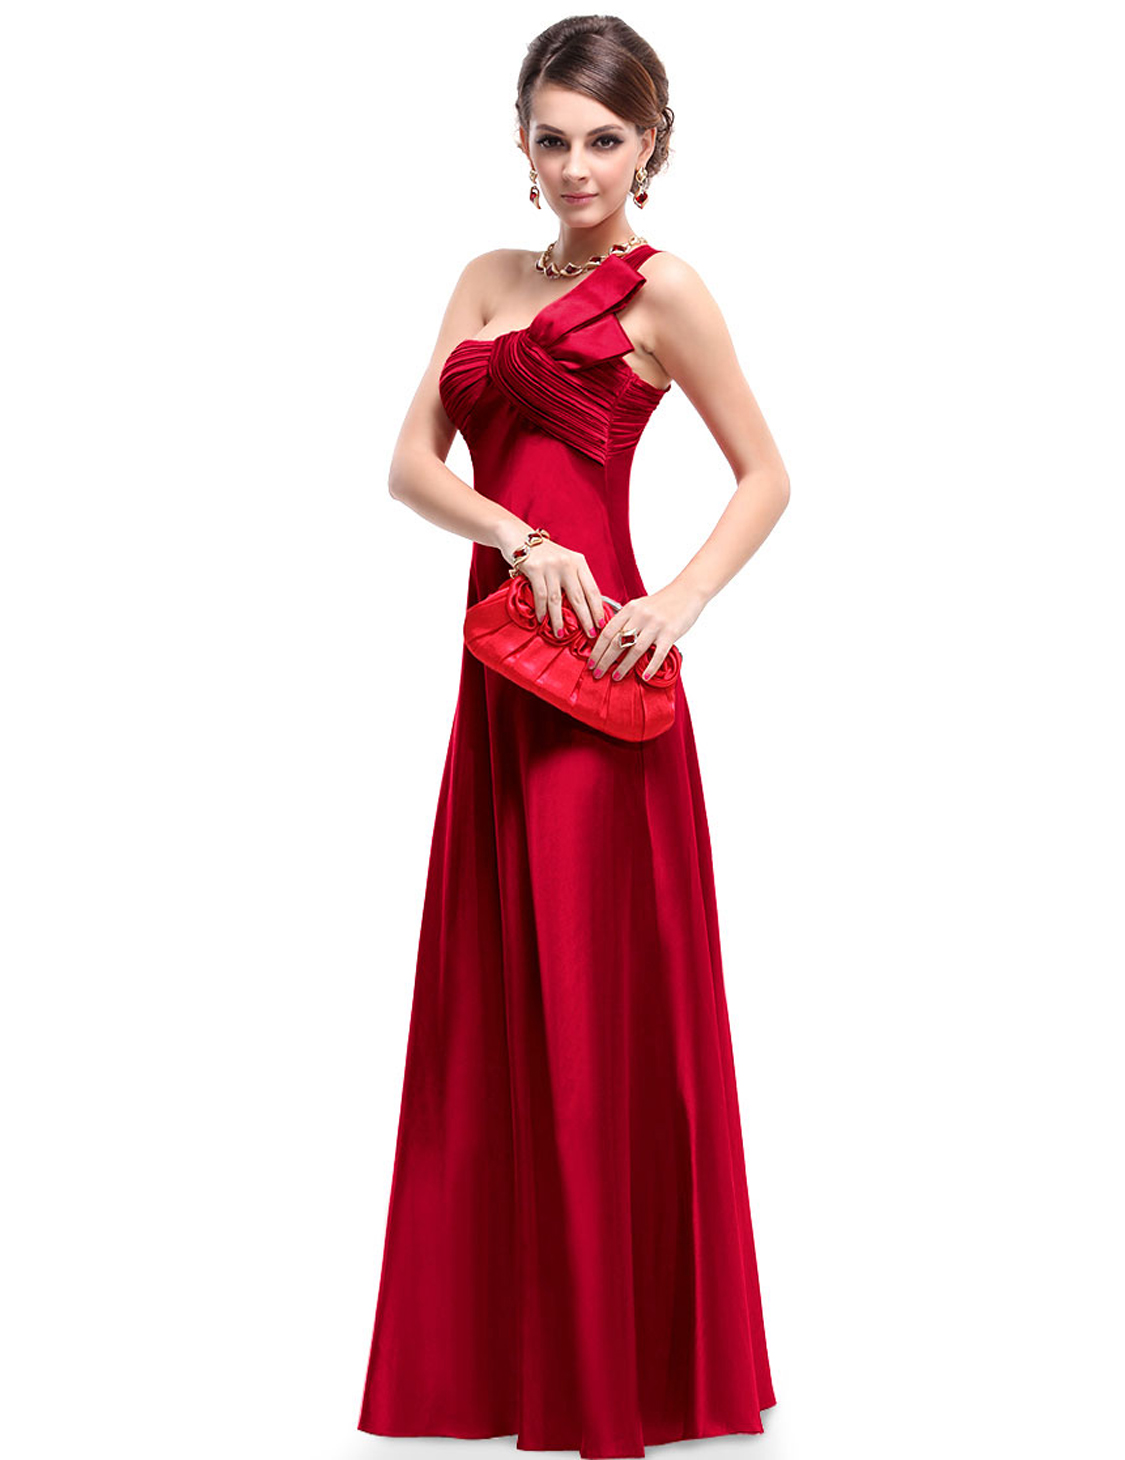 Unique One Shoulder Long Womens Evening Formal Bridesmaid Party Prom ...